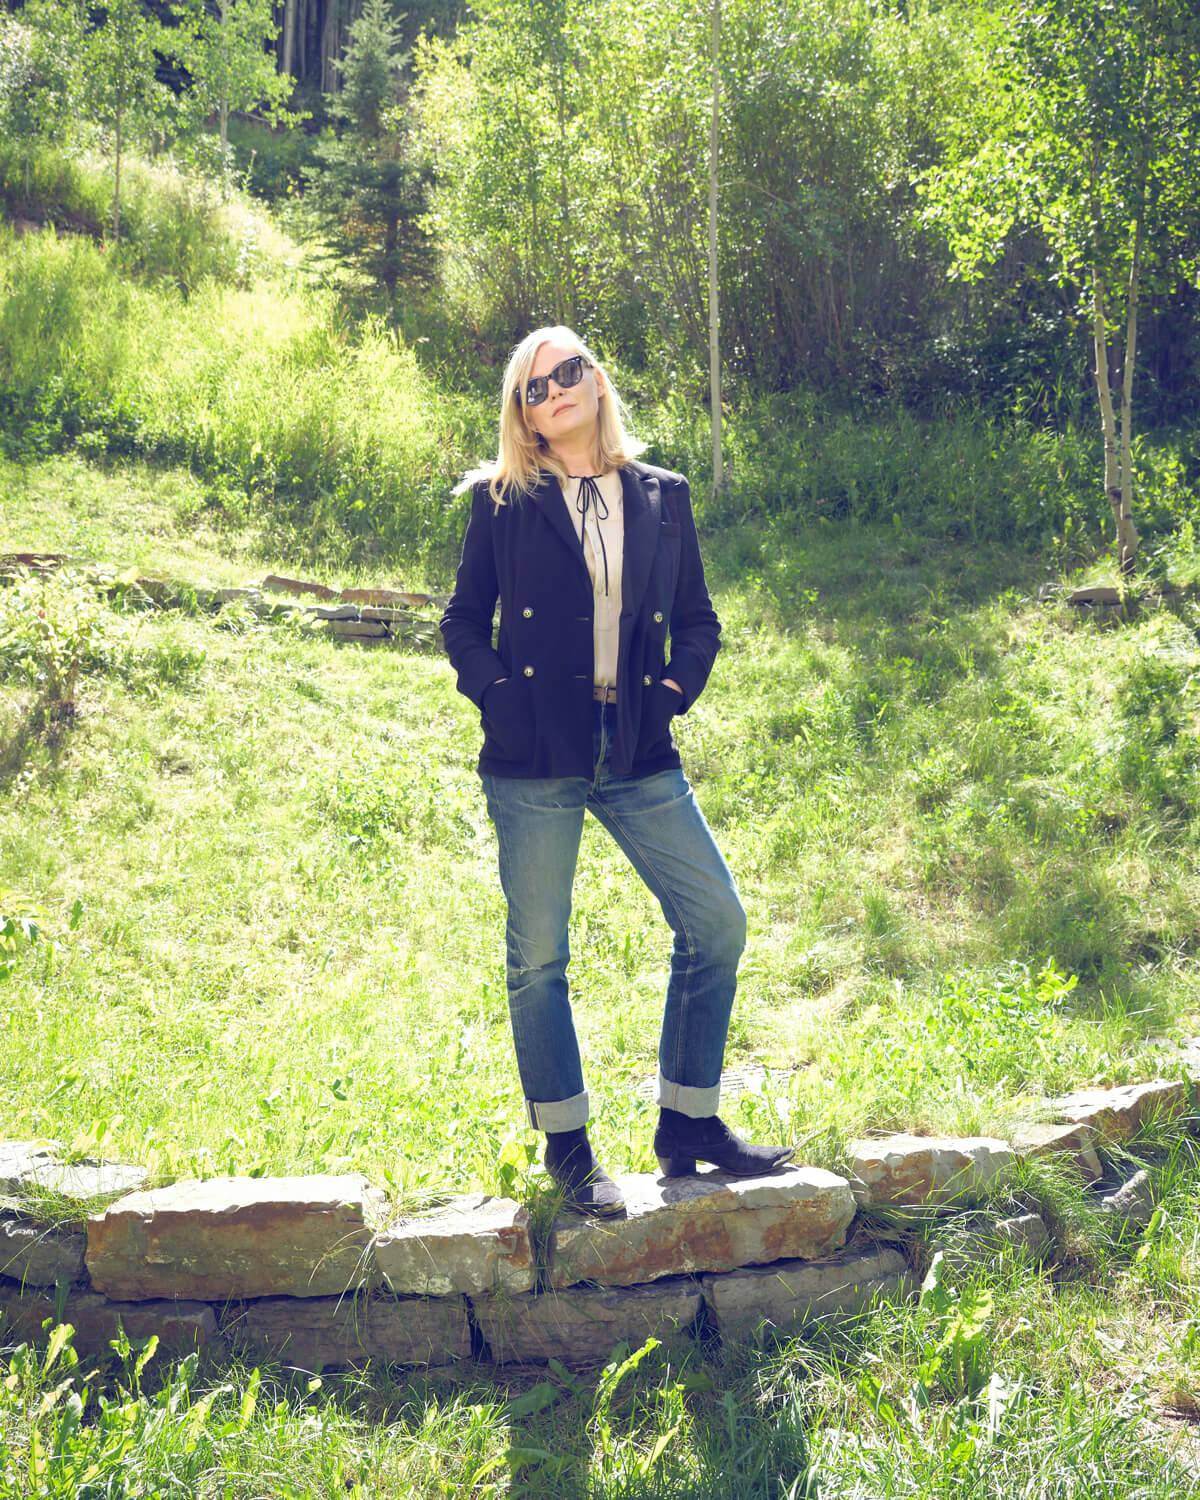 Kirsten Dunst in a double-breasted blazer, blouse, jeans and boots in the woods of the Colorado mountains at the Telluride Film Festival, 2021.